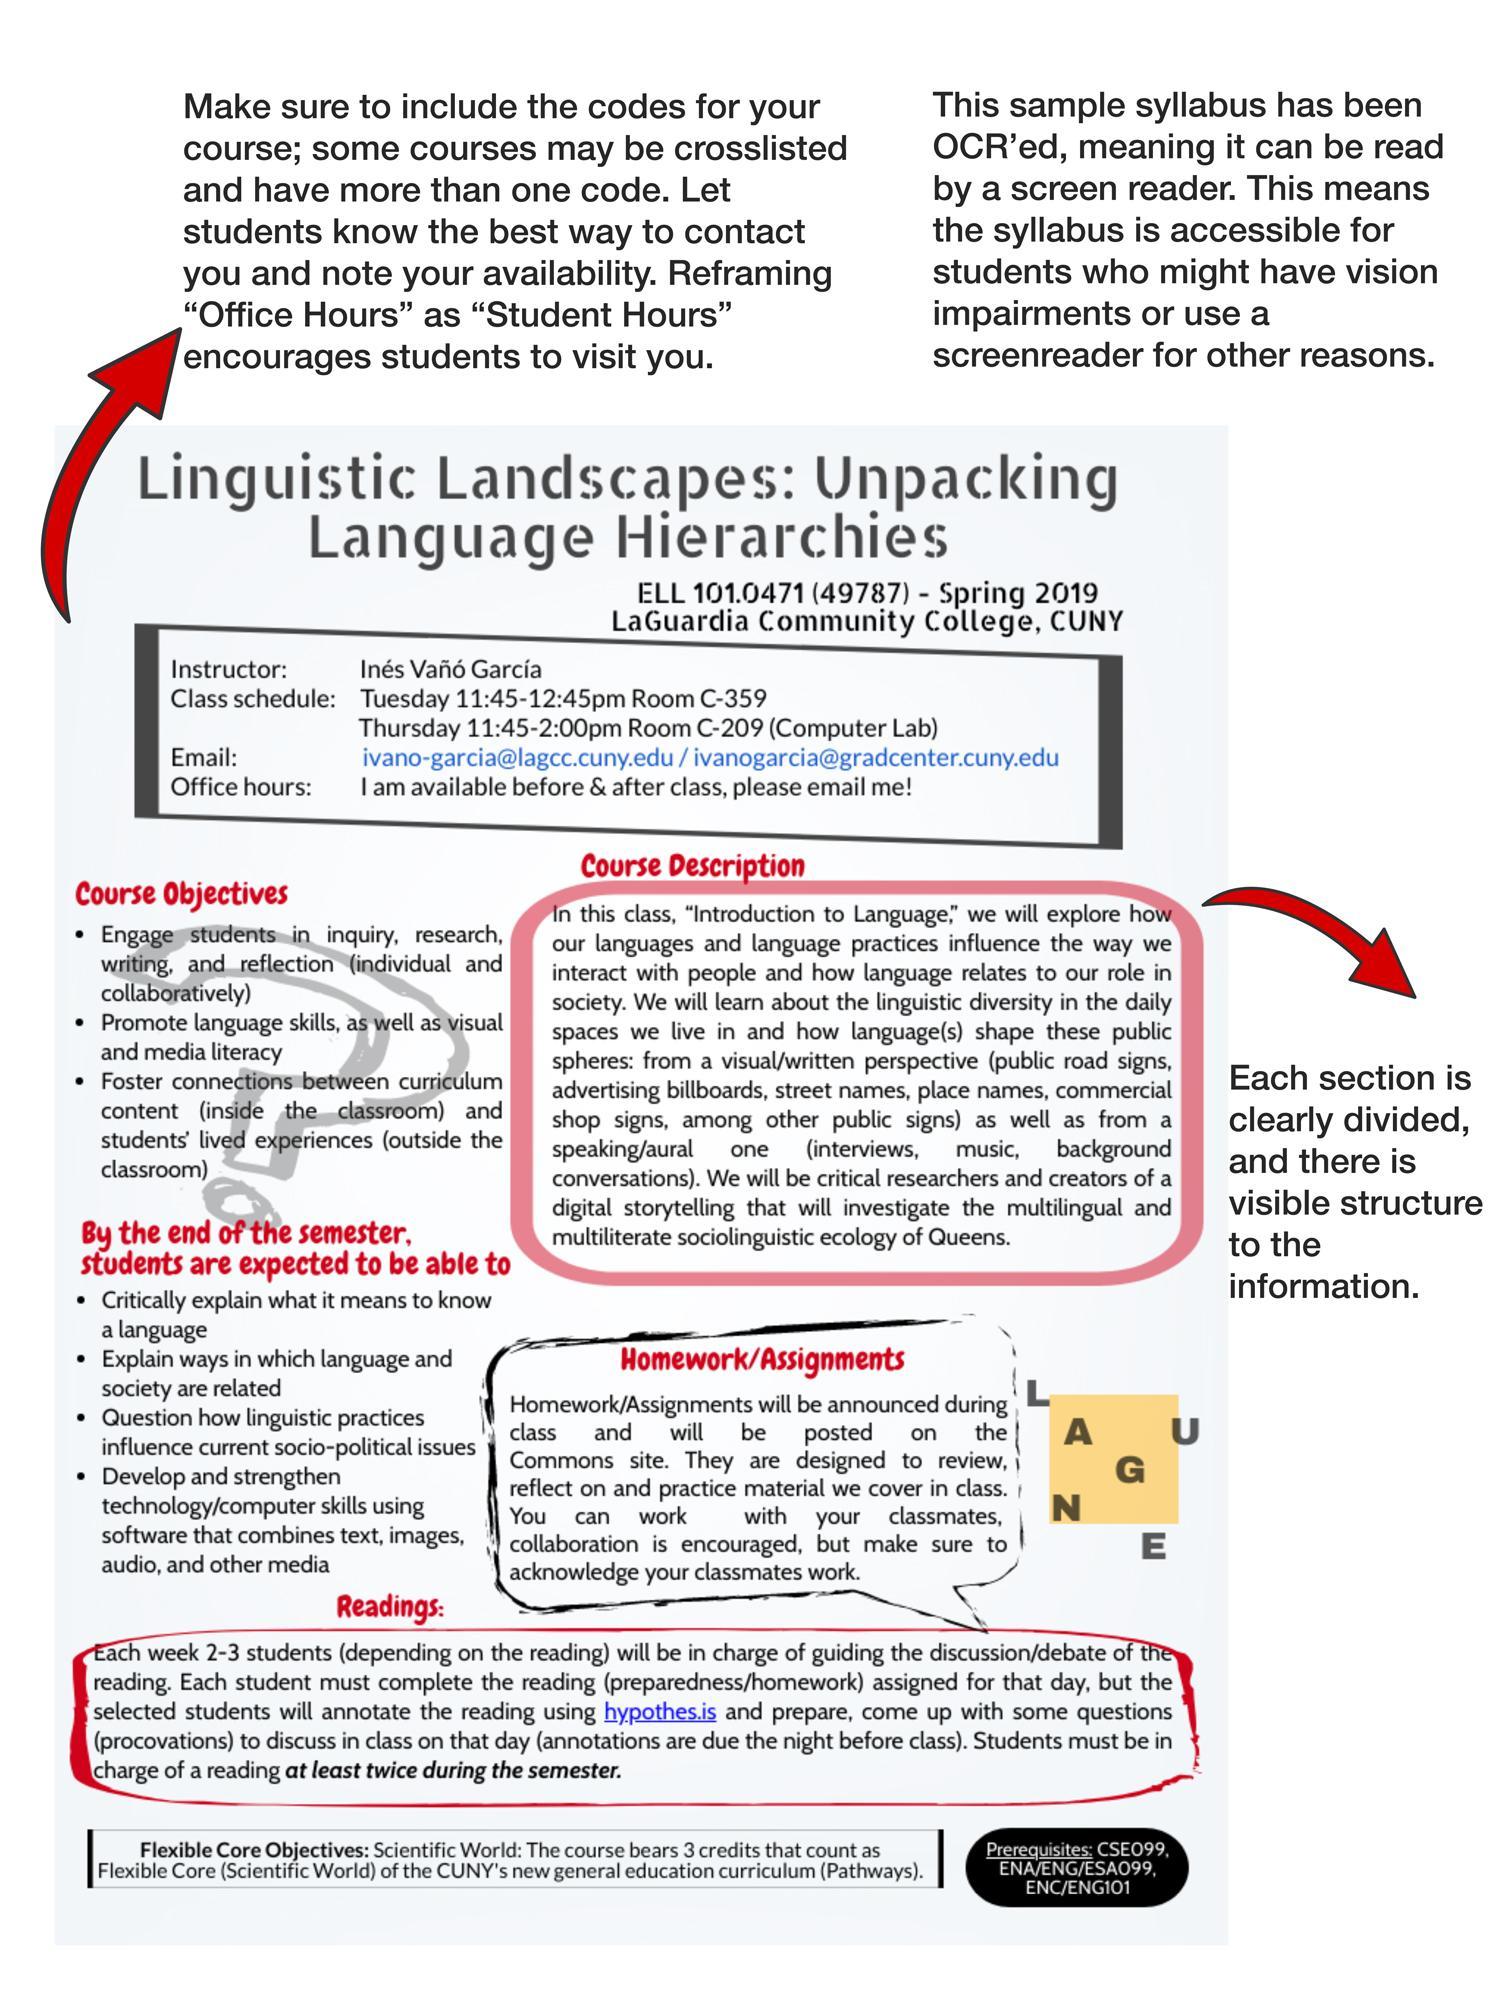 Visual syllabus for Introduction to Language at LaGuardia Community College. 